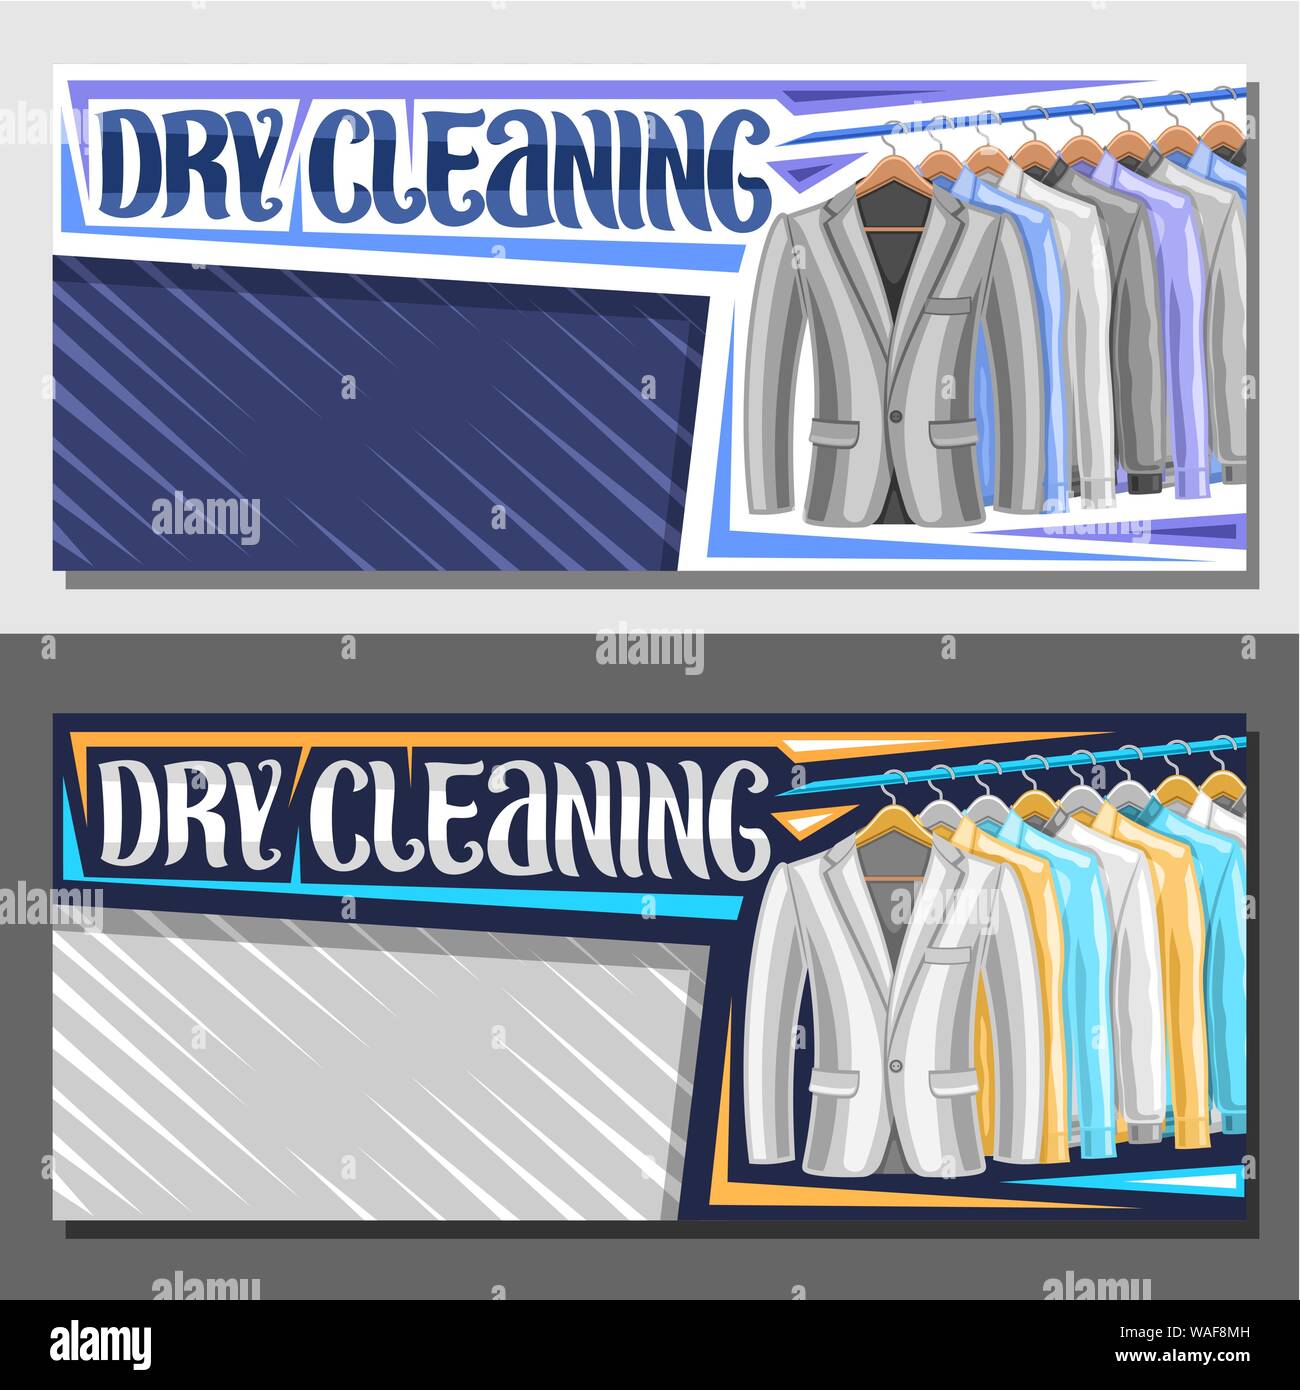 Vector banners for Dry Cleaning with copy space, blue leaflet with illustration of blazers and colorful shirts hanging on hanger, brush typeface for w Stock Vector